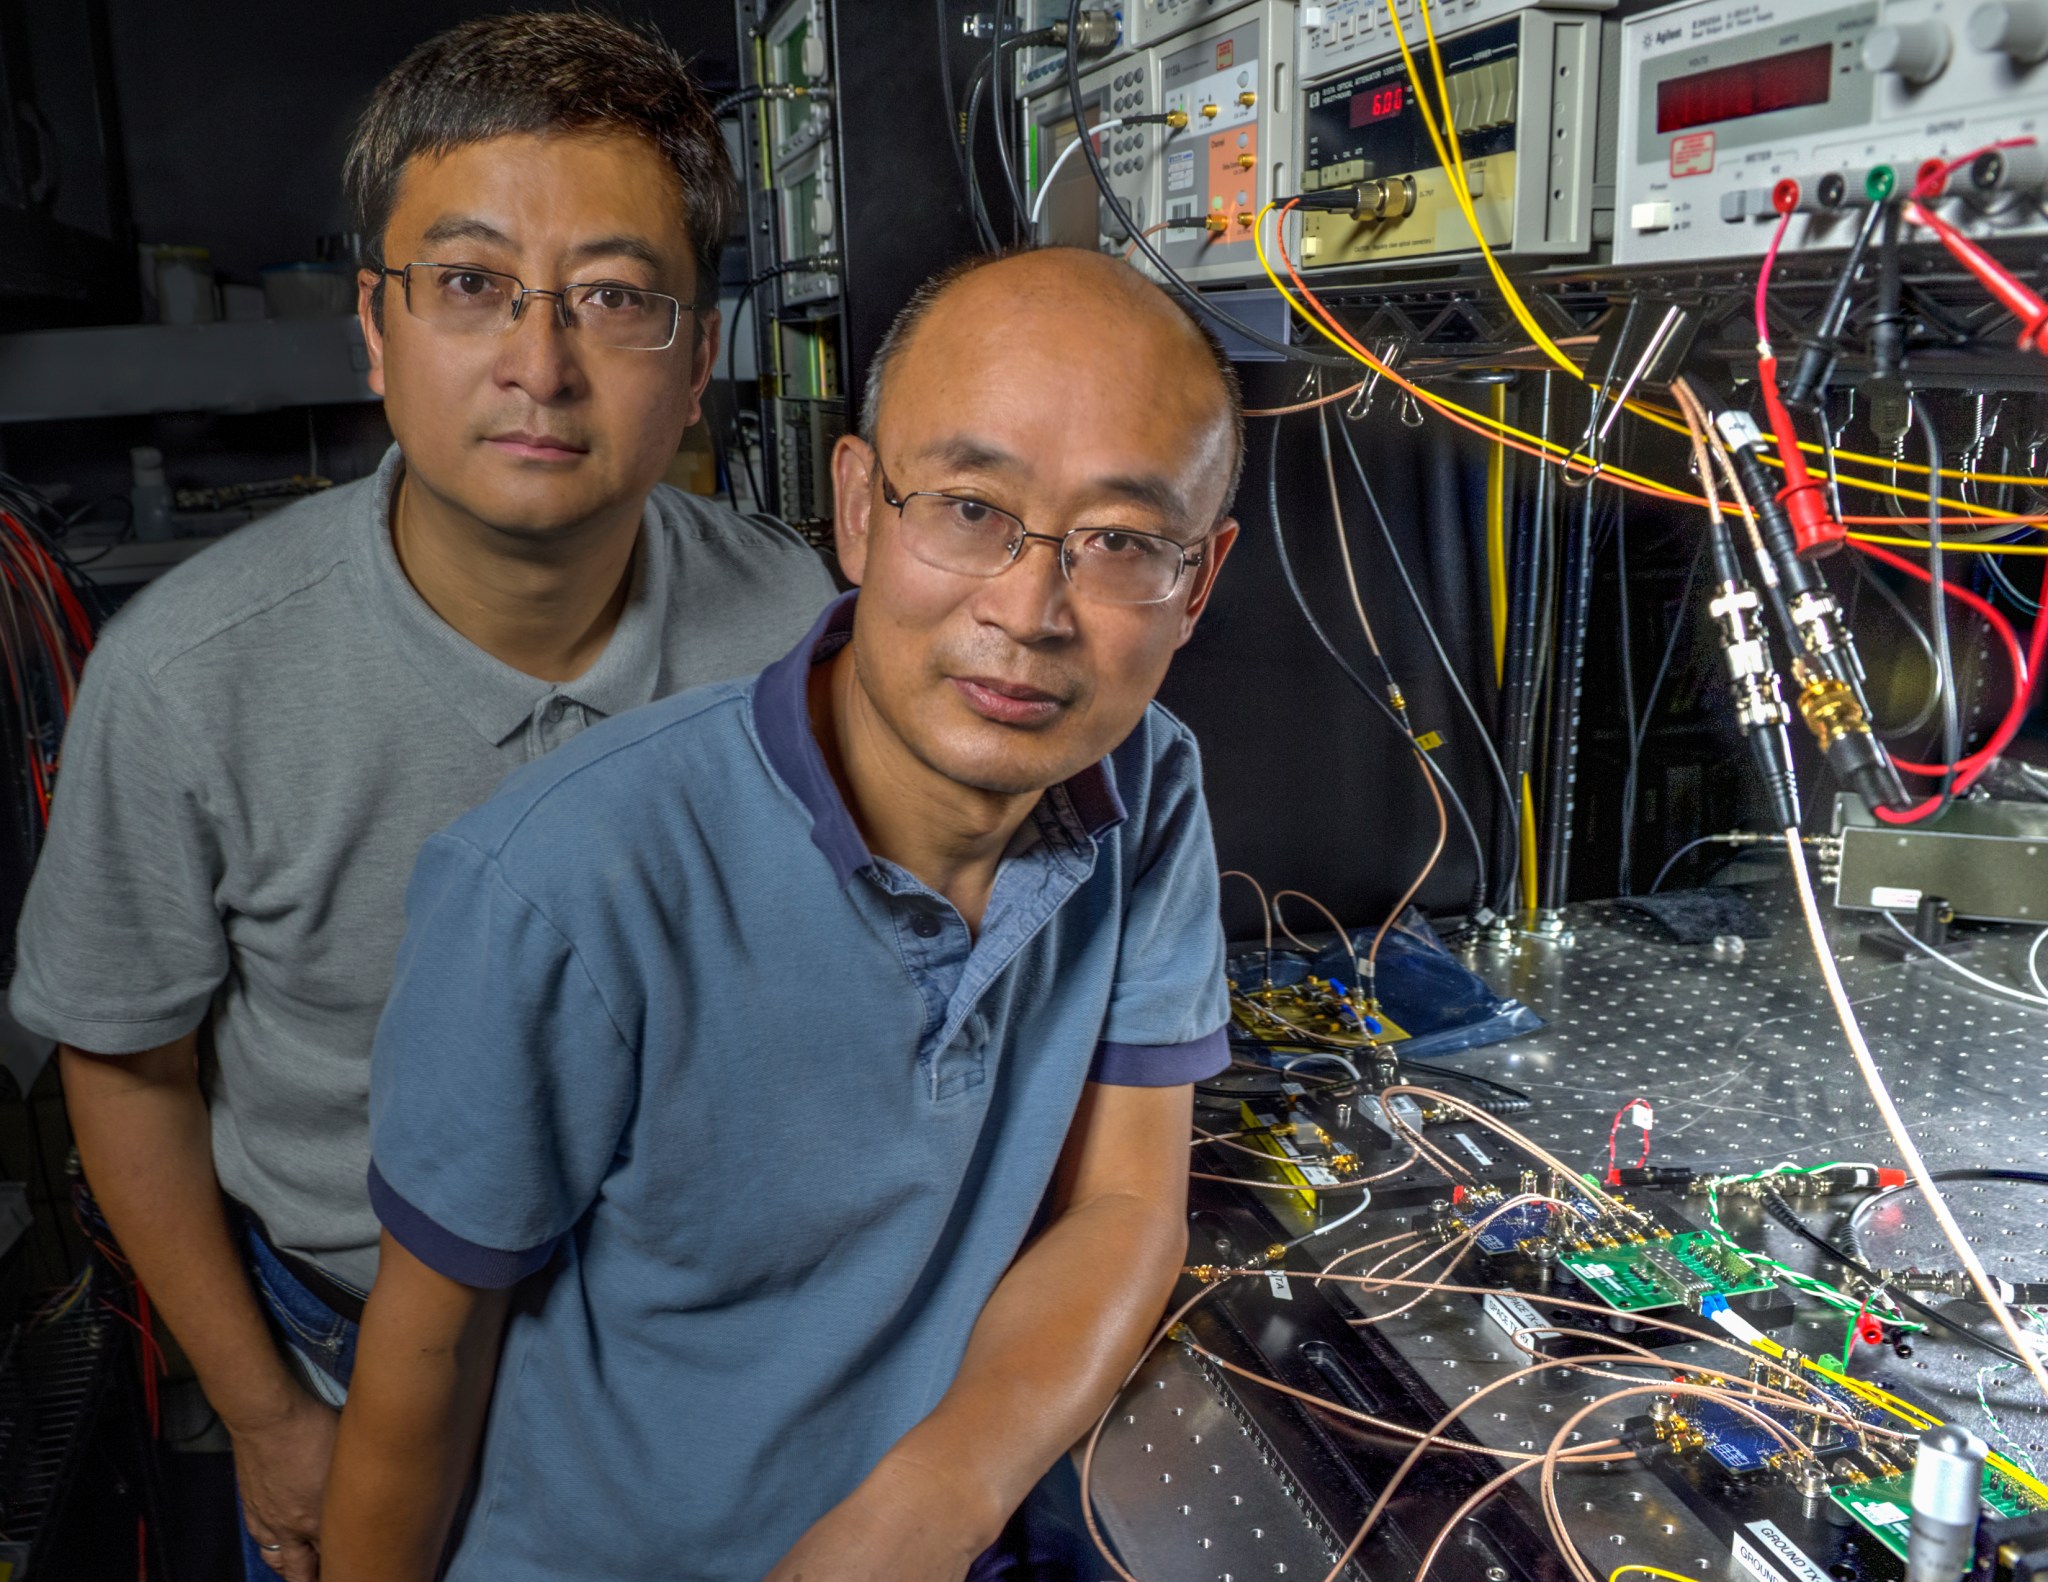 Yang and research associate, Wei Lu both wearing polo shirts and glasses stand with many wires and electrical components